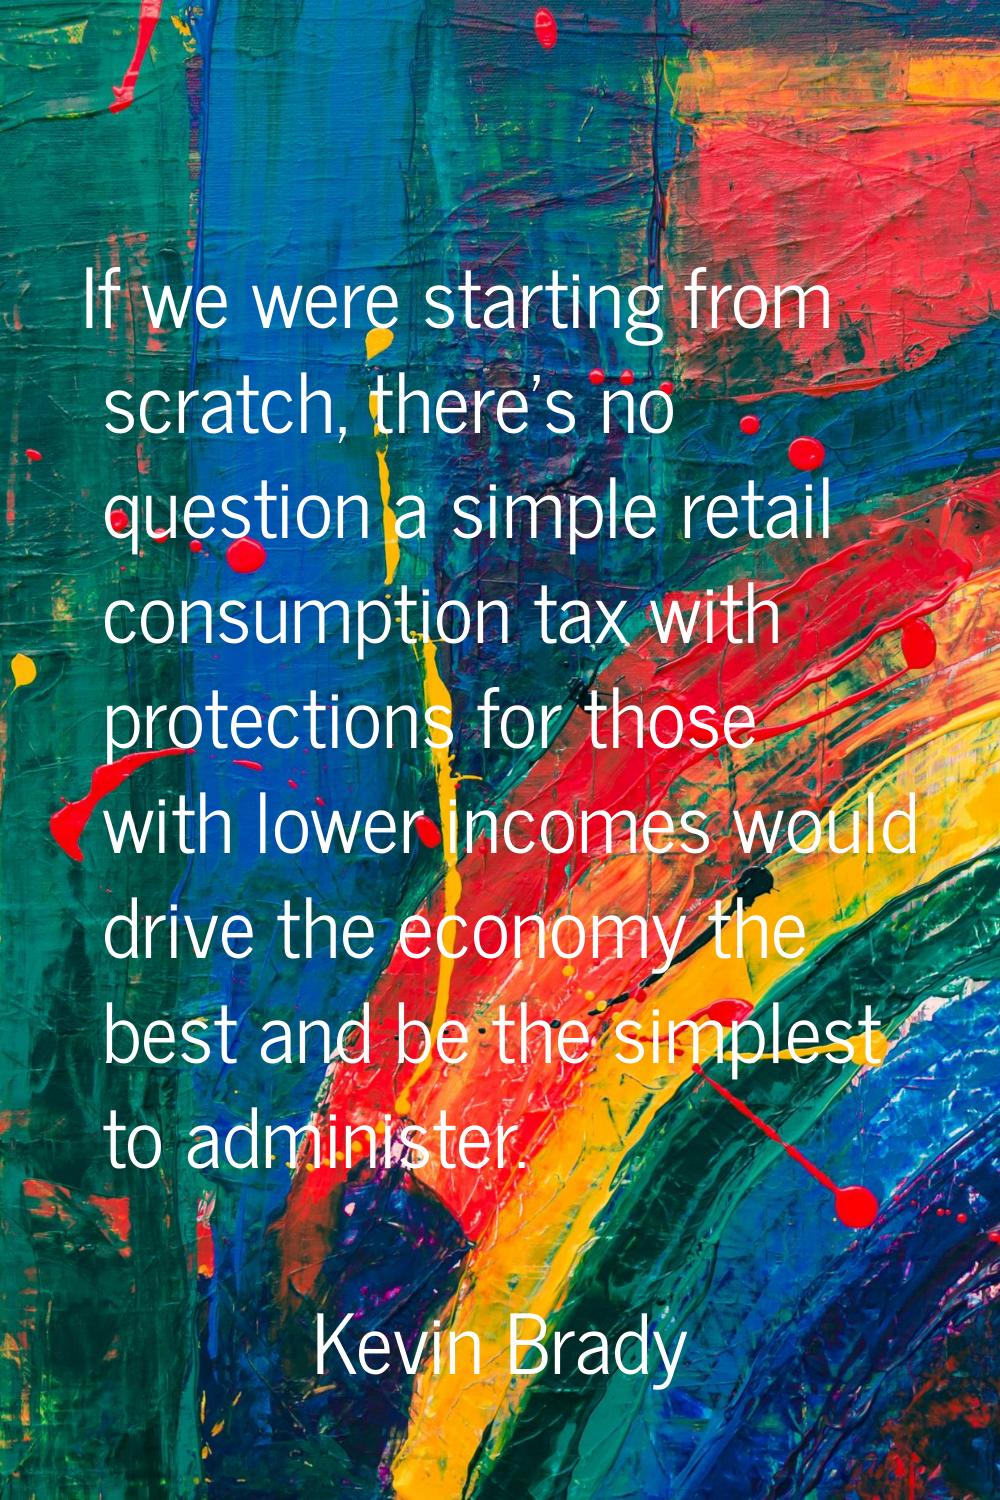 If we were starting from scratch, there's no question a simple retail consumption tax with protecti